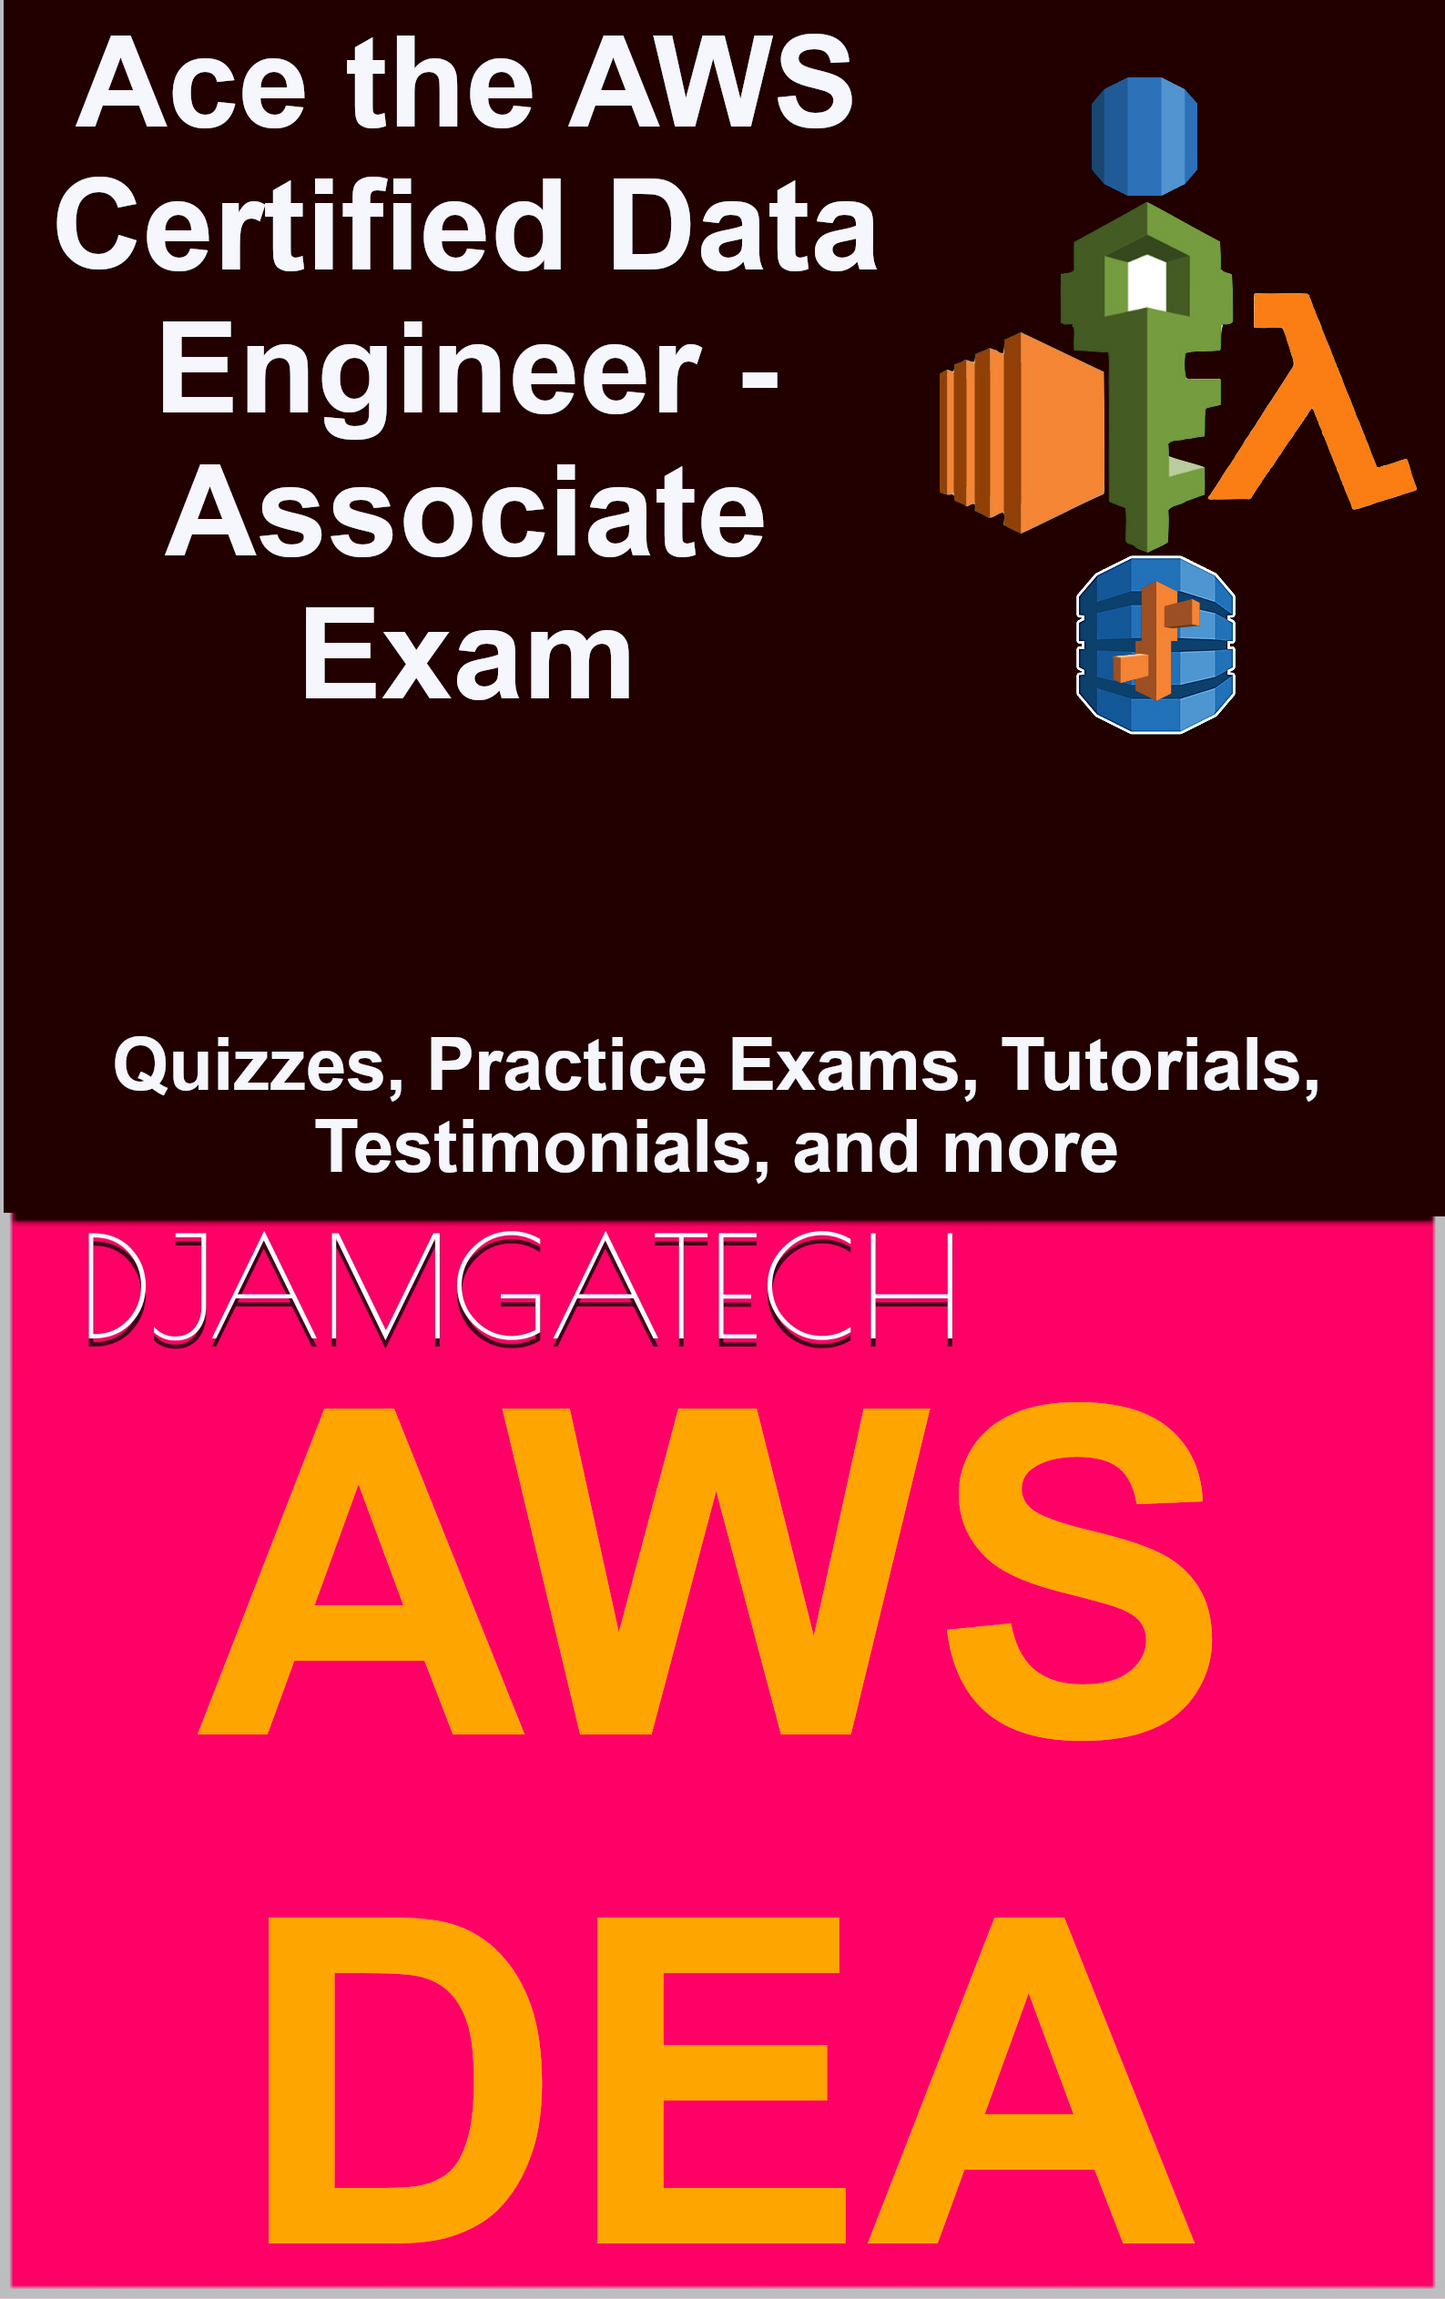 Ace the AWS Certified Data Engineer Exam